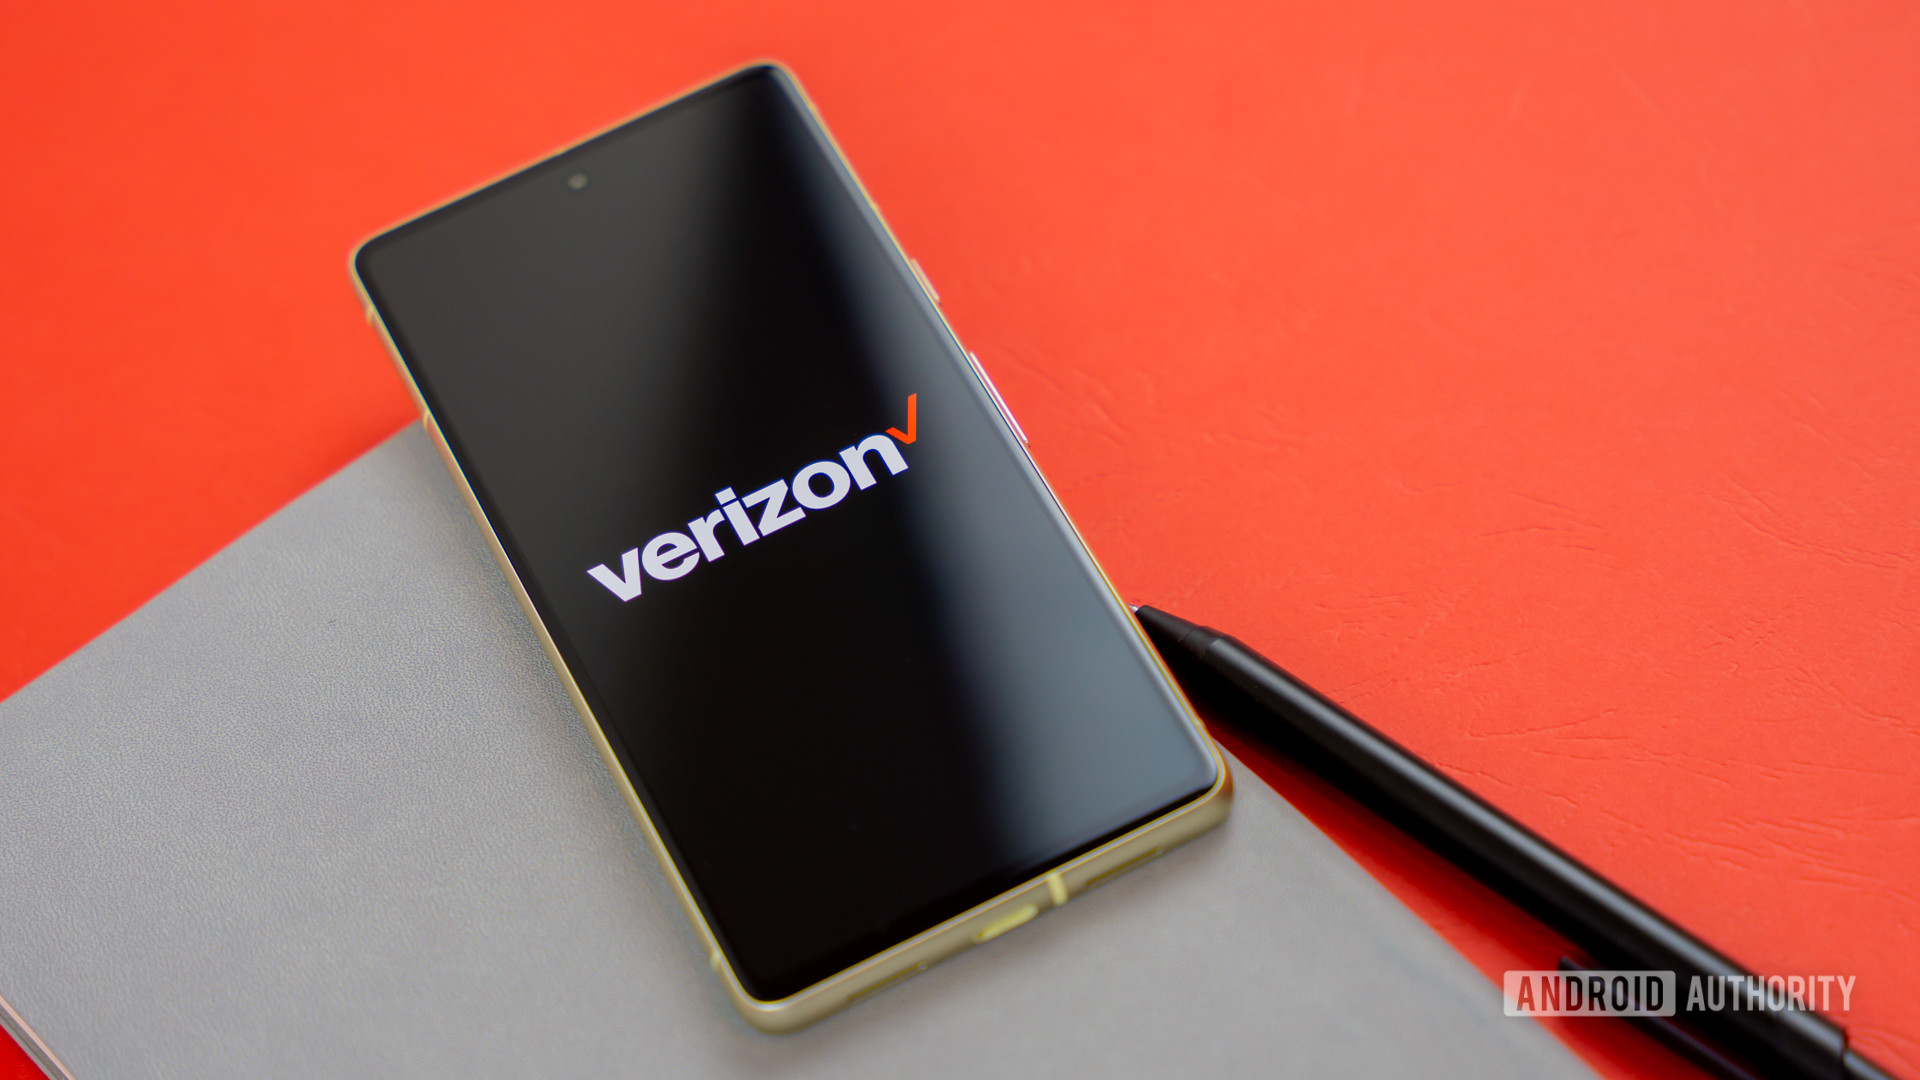 Verizon logo on smartphone with a colored background Stock photo 5